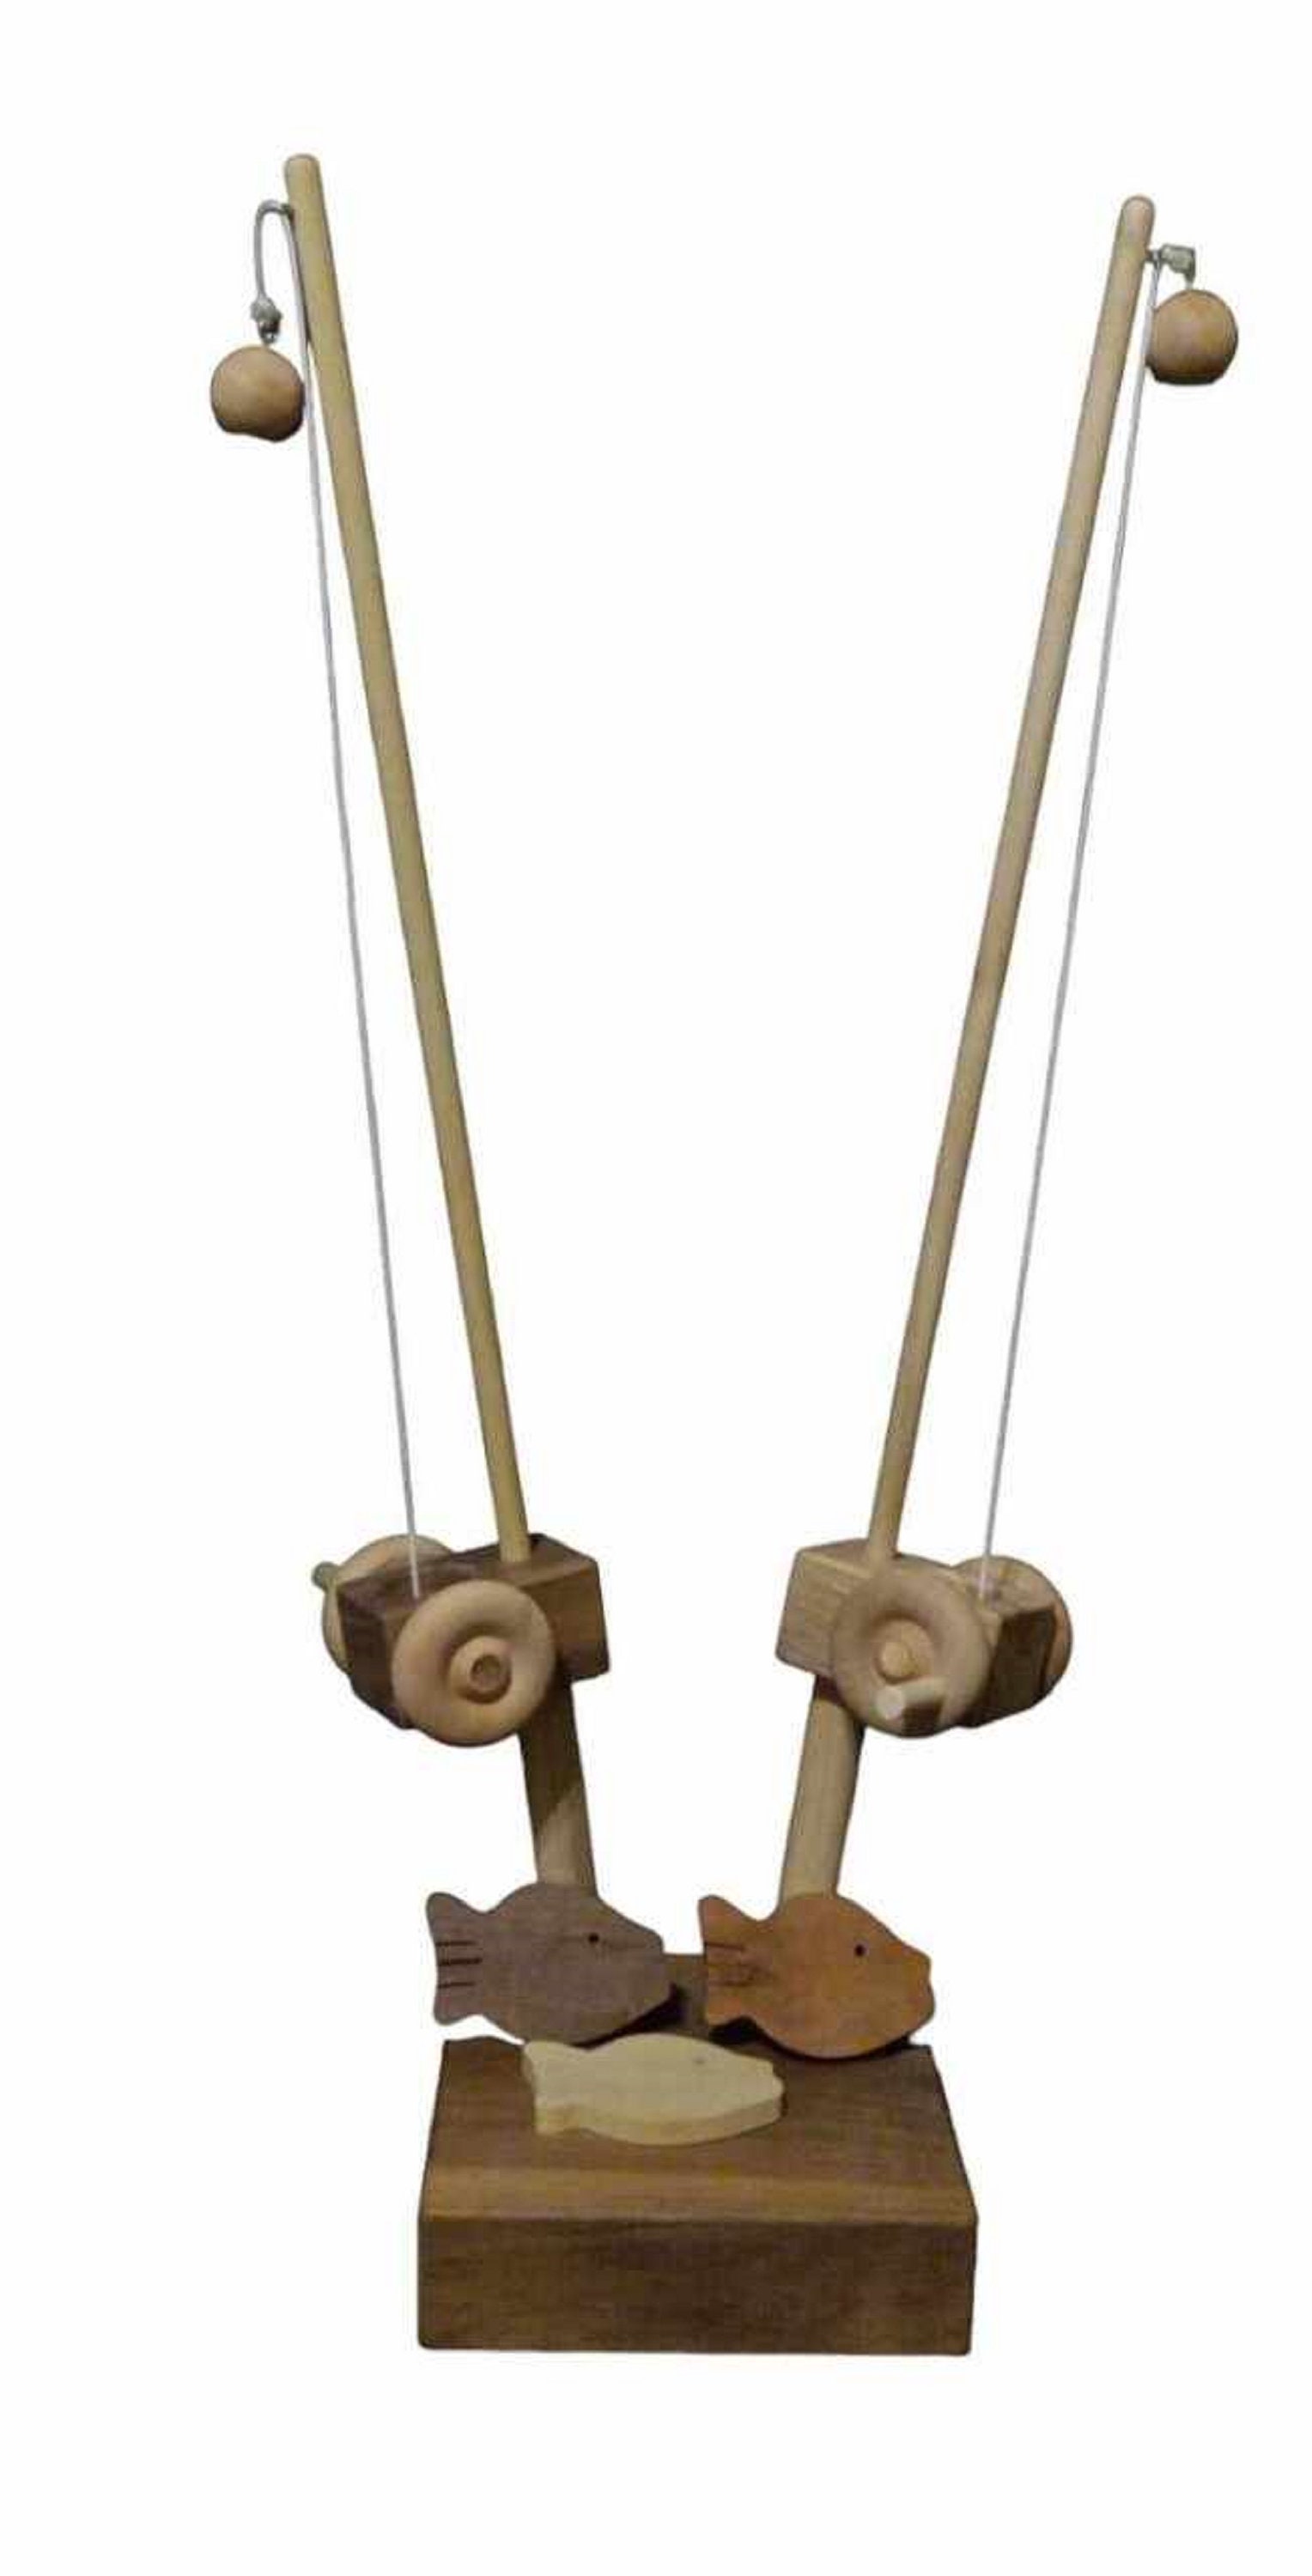 Organic Wooden Toy Fishing Pole With 3 Fish 